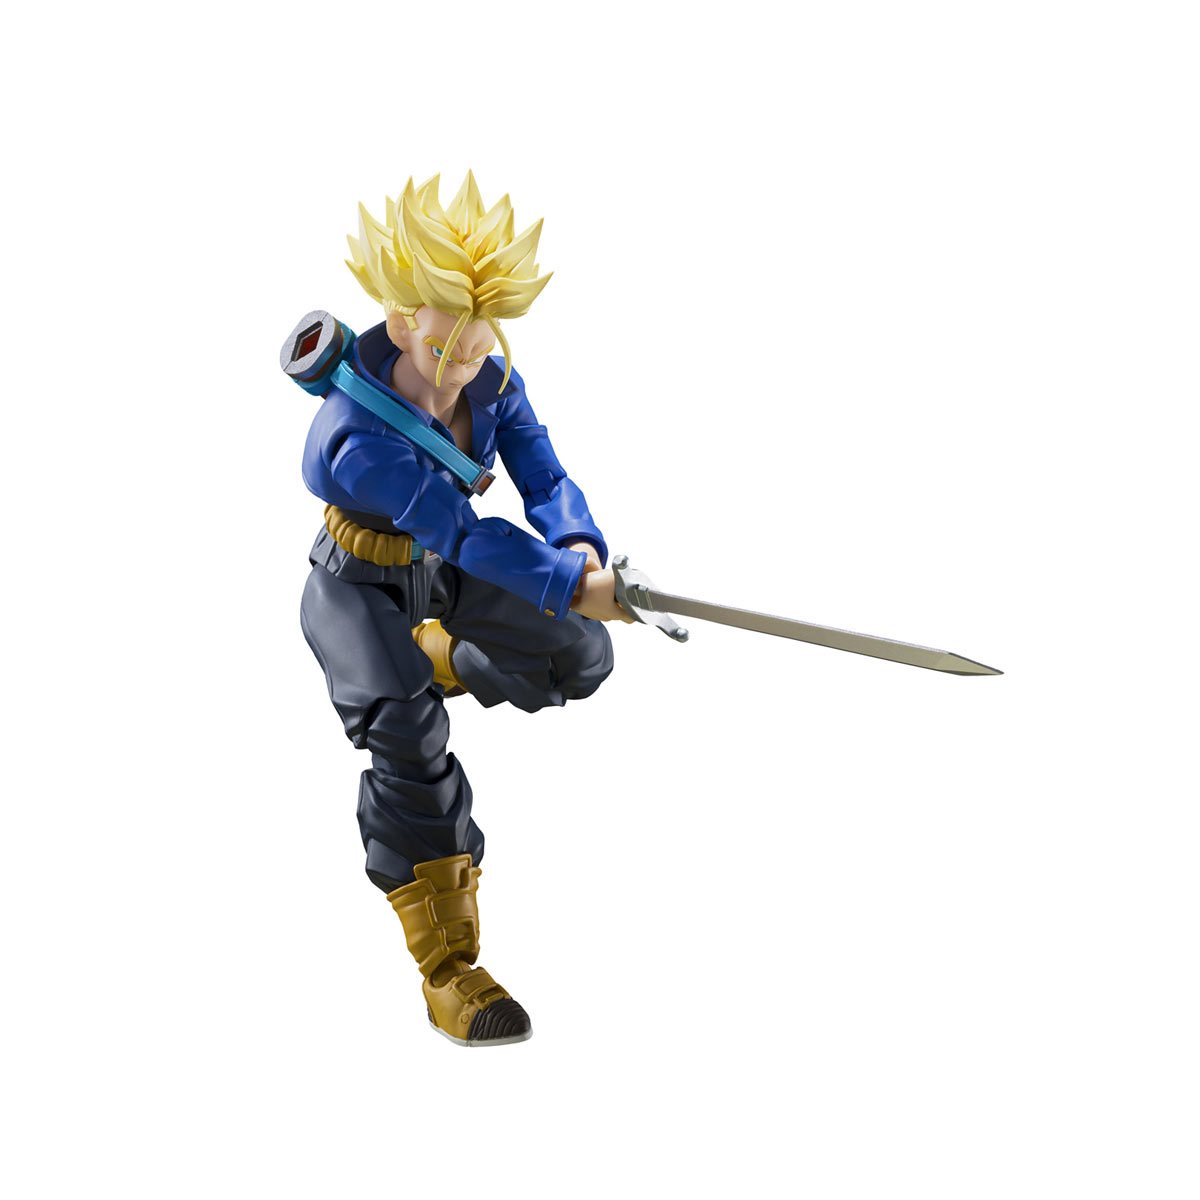 Character Profile, Dragon Ball Z, Dbz, Trunks, Anime, - Dragon Ball Z Trunks  Png Transparent PNG - 524x782 - Free Download on NicePNG